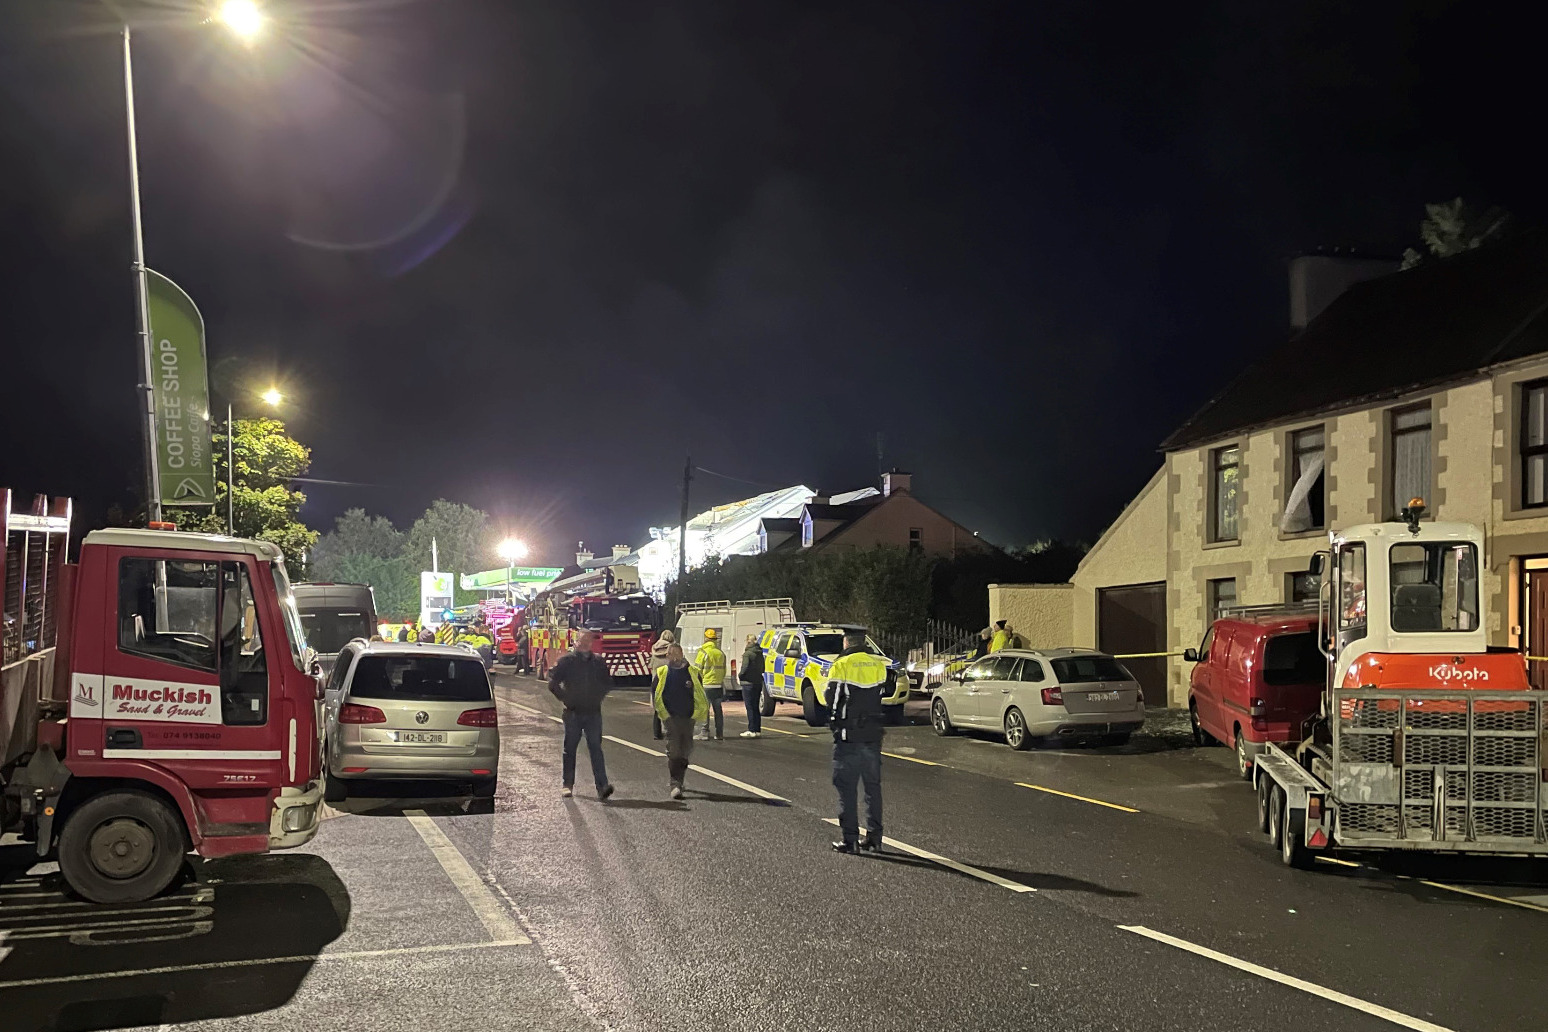 Three people confirmed dead as searching continues at petrol station blast site 